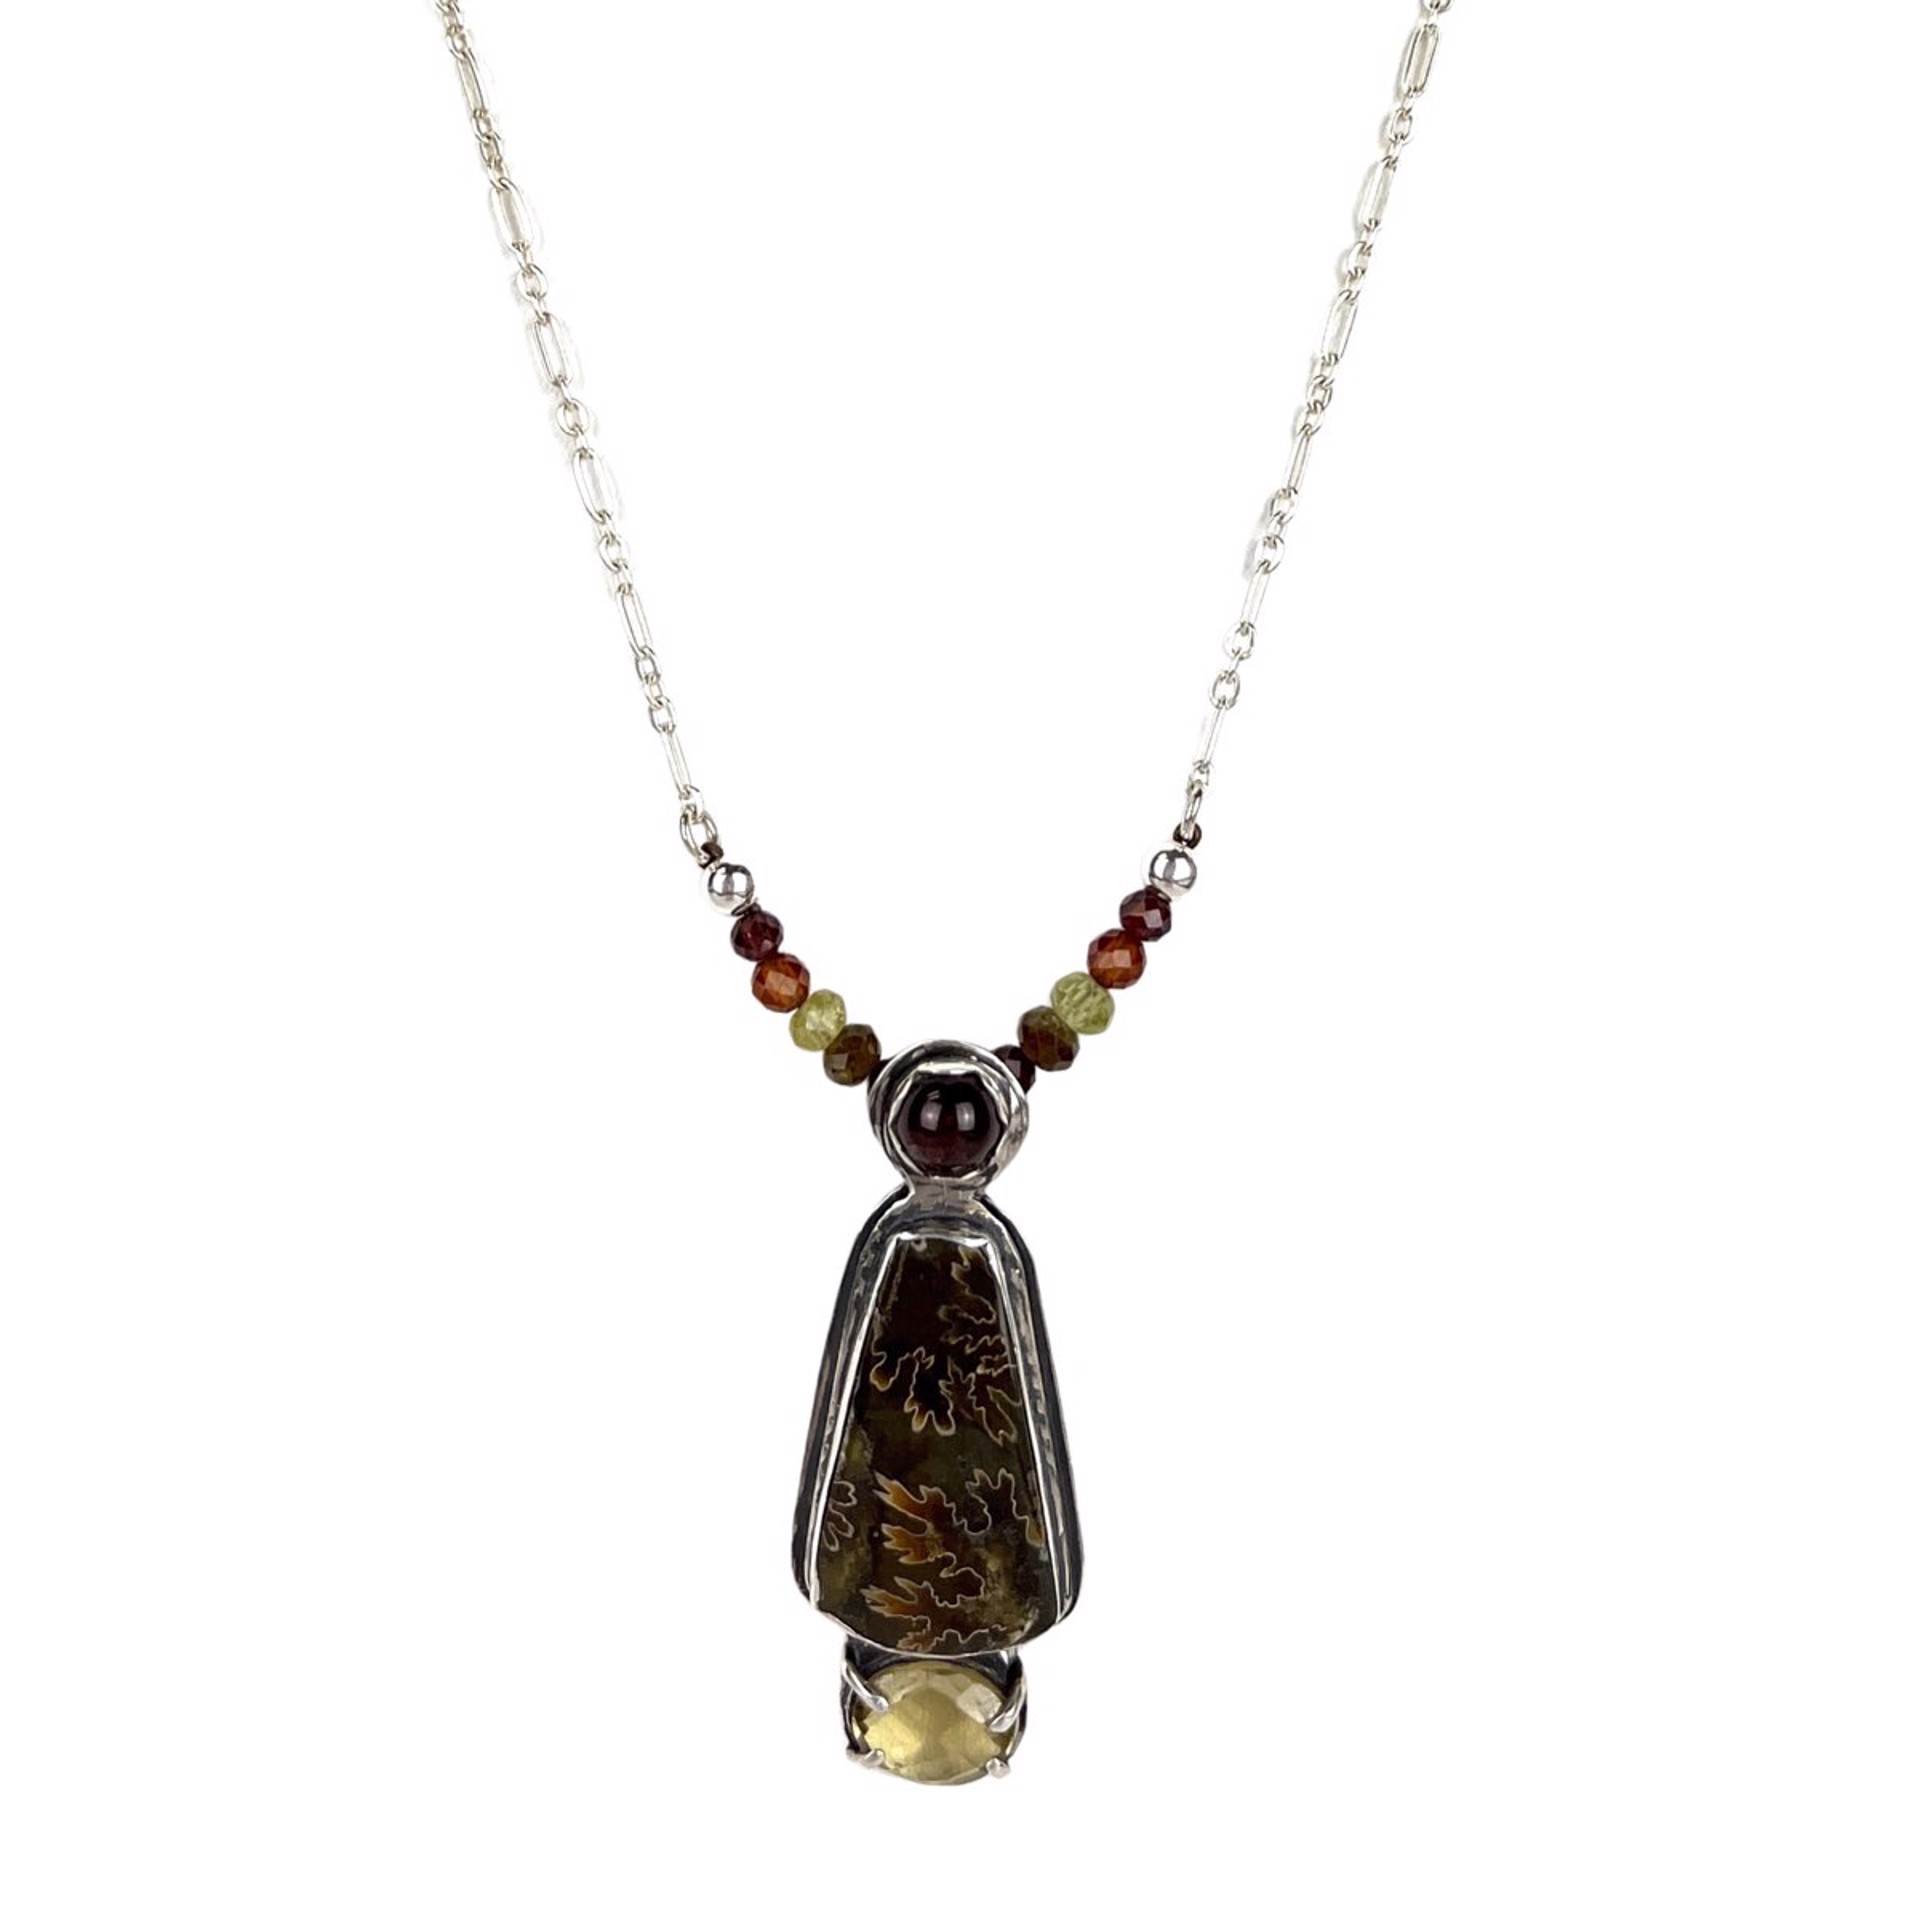 Sphenodiscus, Whiskey Citrine, Garnet, Small Tourmaline and Sterling Silver Necklace by Nola Smodic